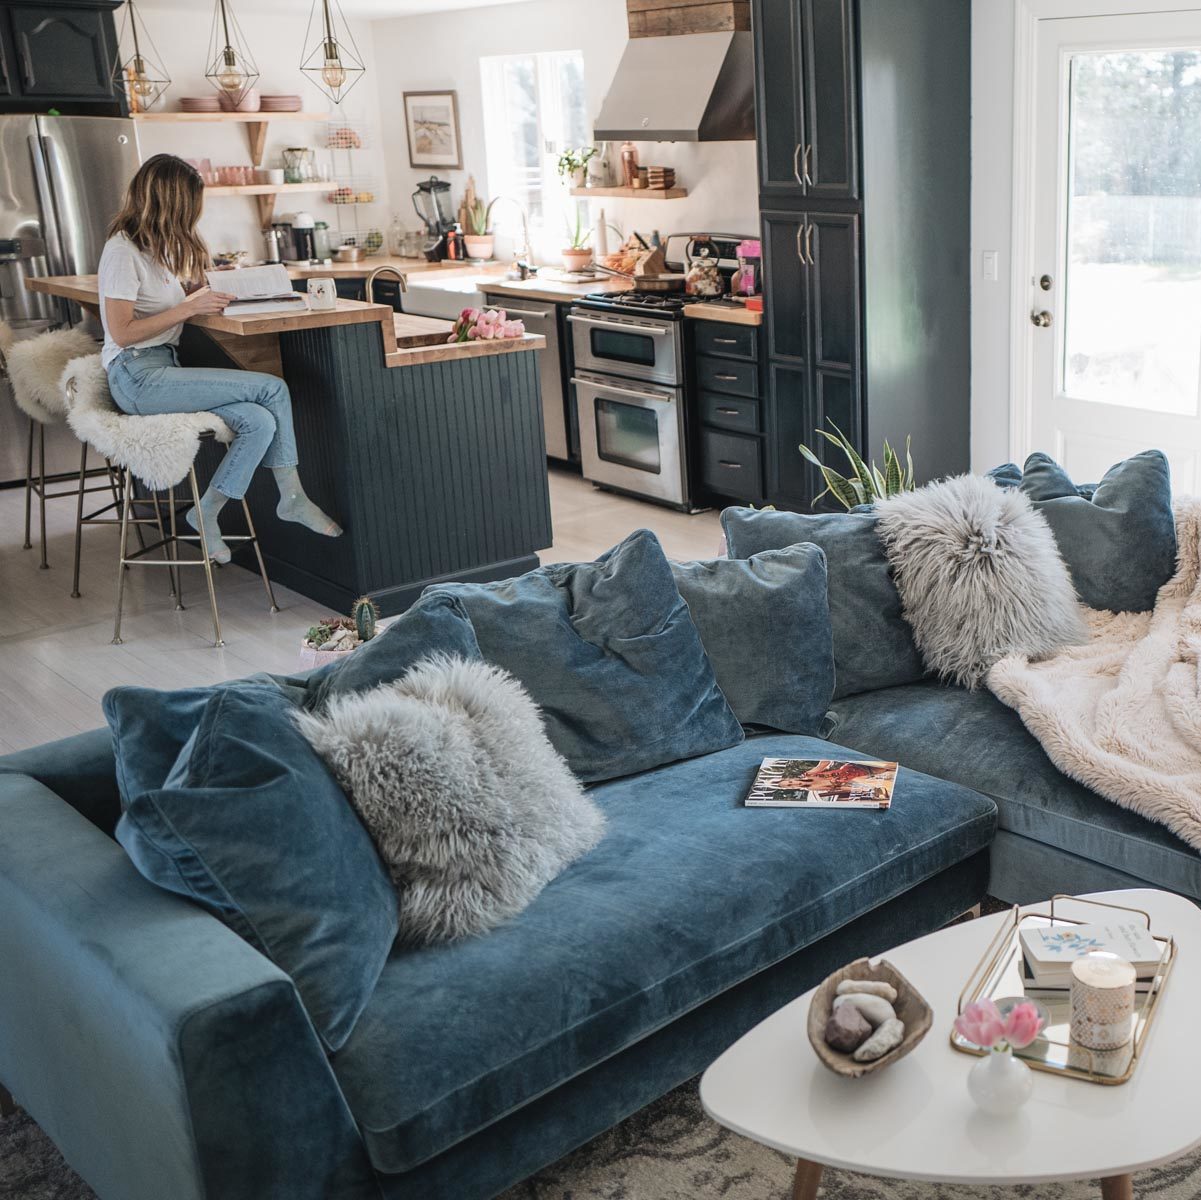 Jess Ann Kirby reveals her living room renovation featuring a velvet sectional sofa